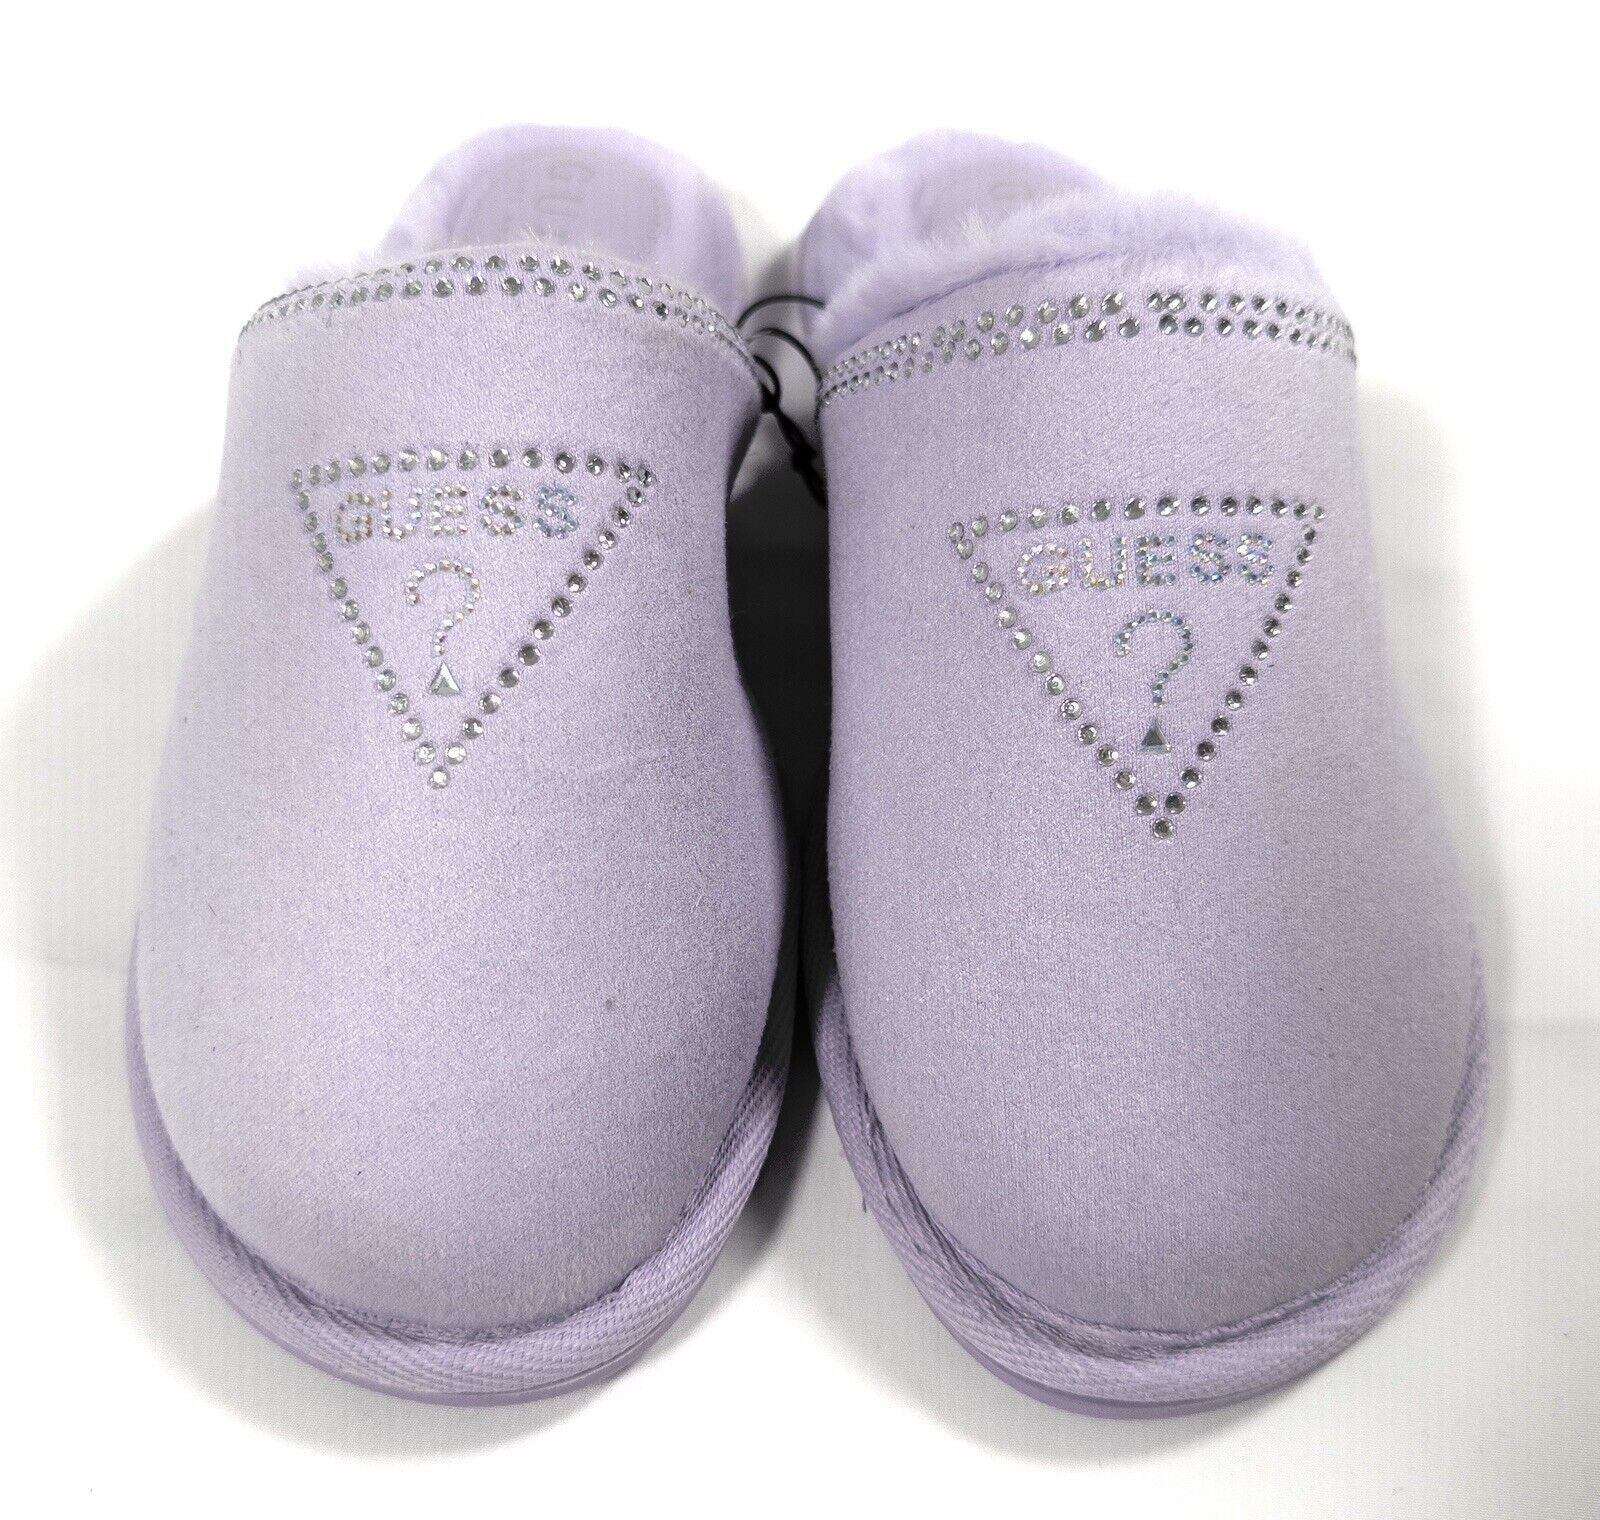 GUESS Women's Lilac Slip On Slippers Fluffy Size UK 6